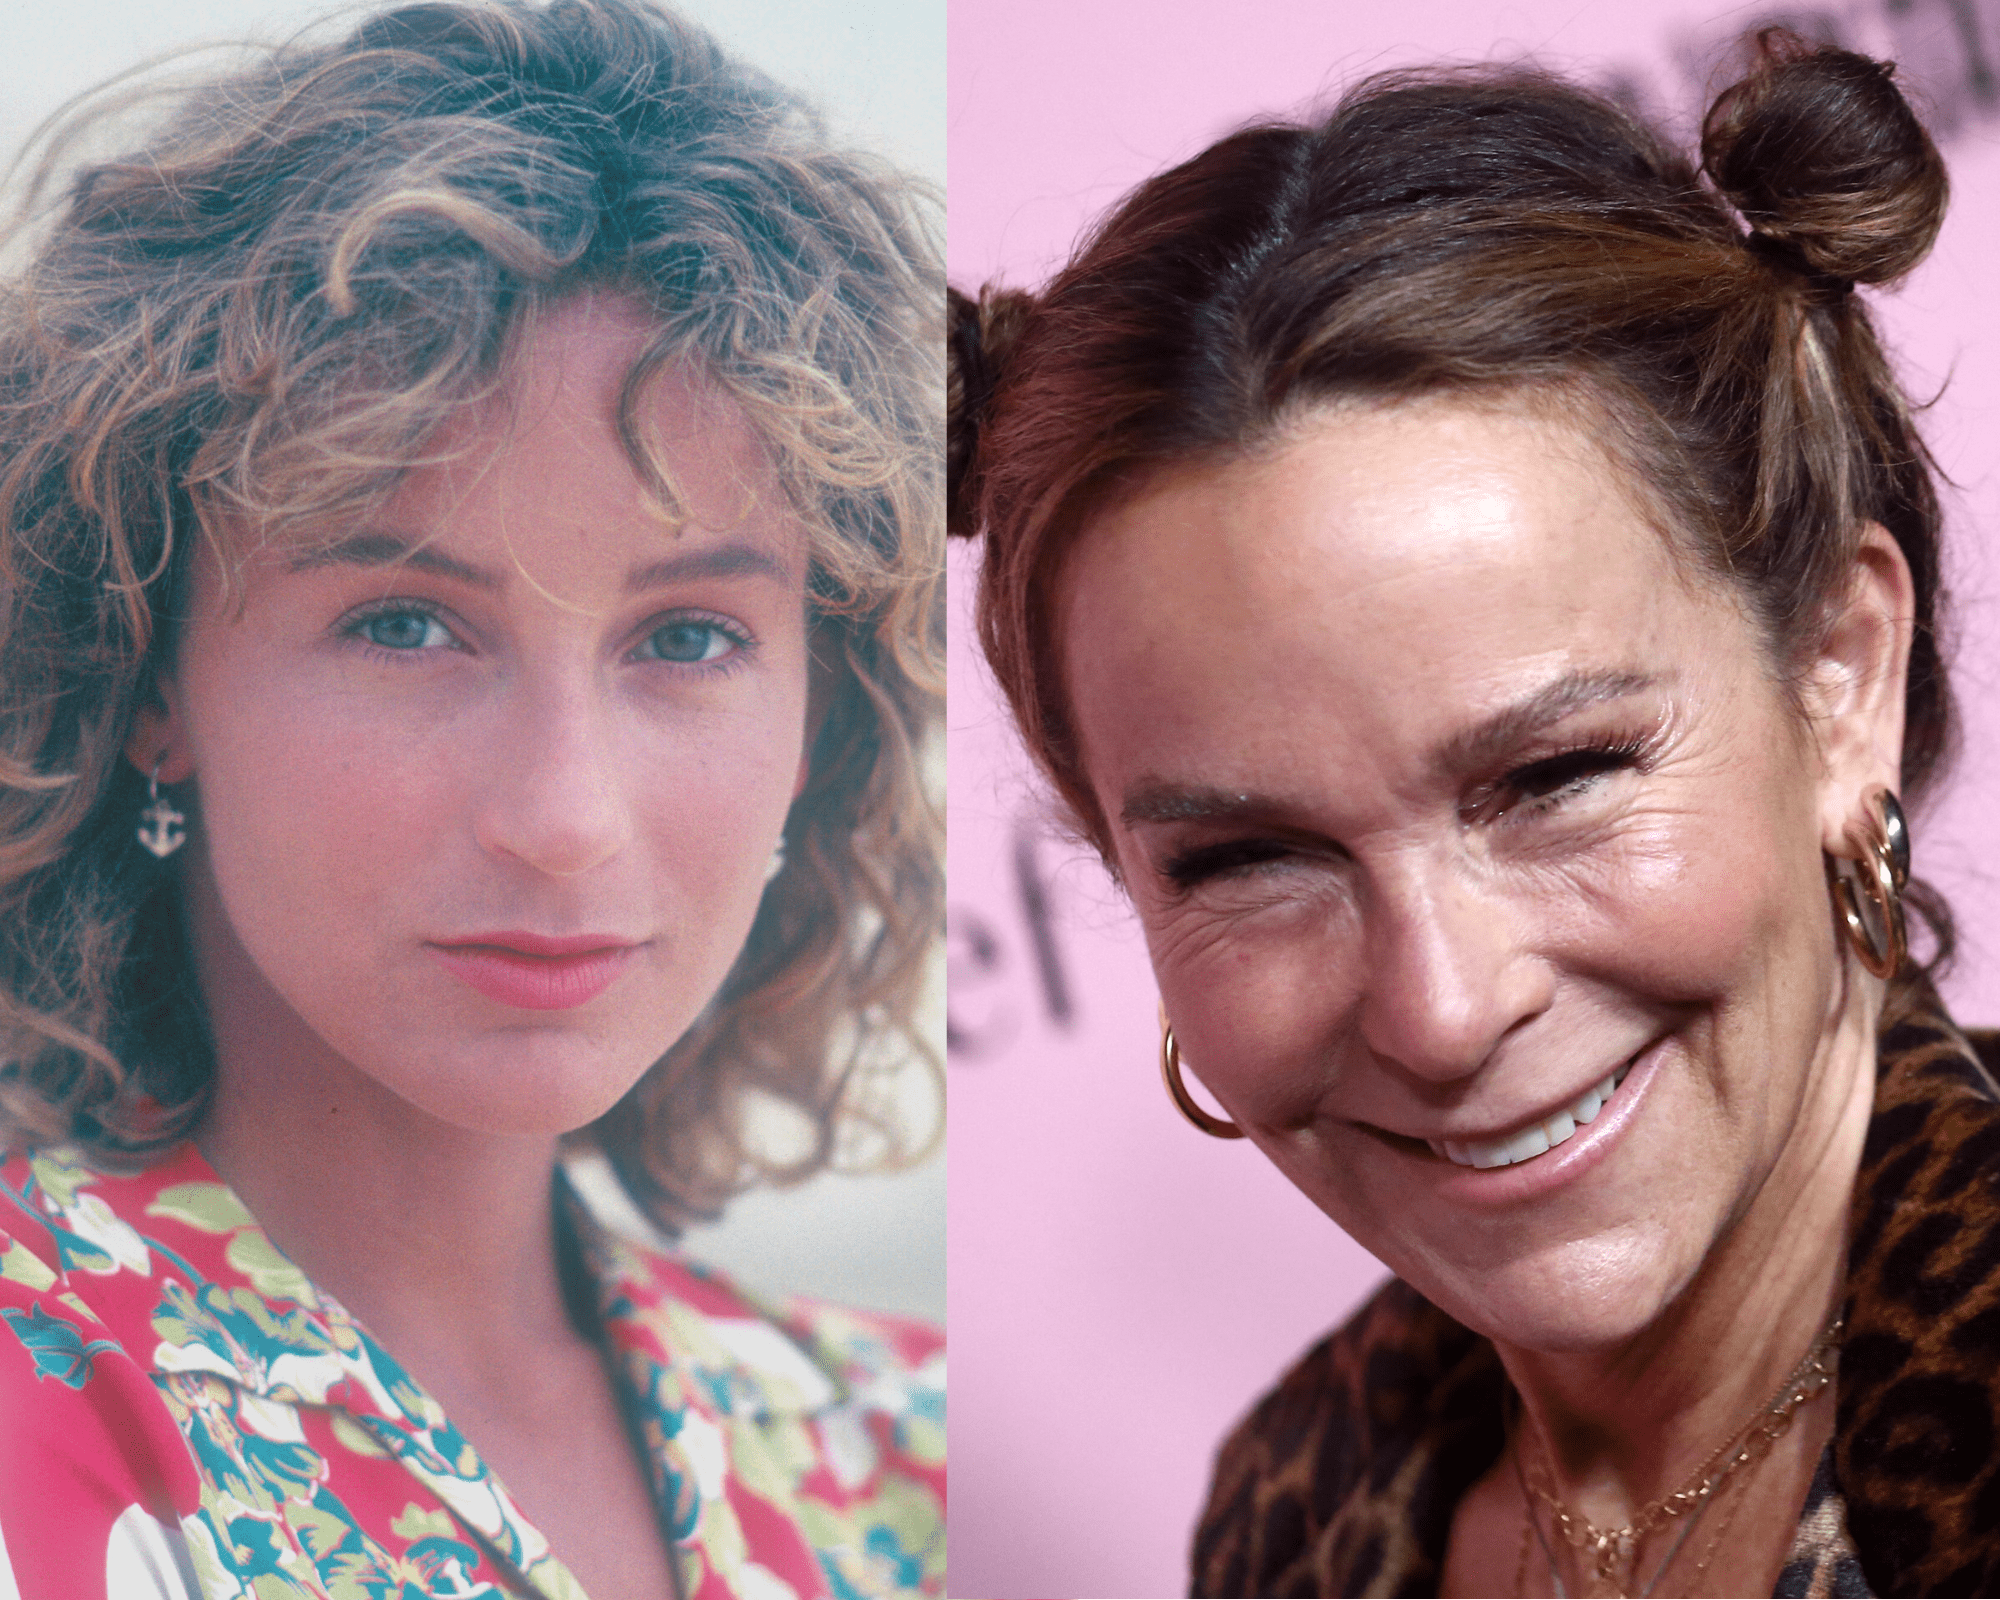 Actress Jennifer Grey in New York City, 1980s | Jennifer Grey on October 16, 2021 in Los Angeles, California | Source: Getty Images 